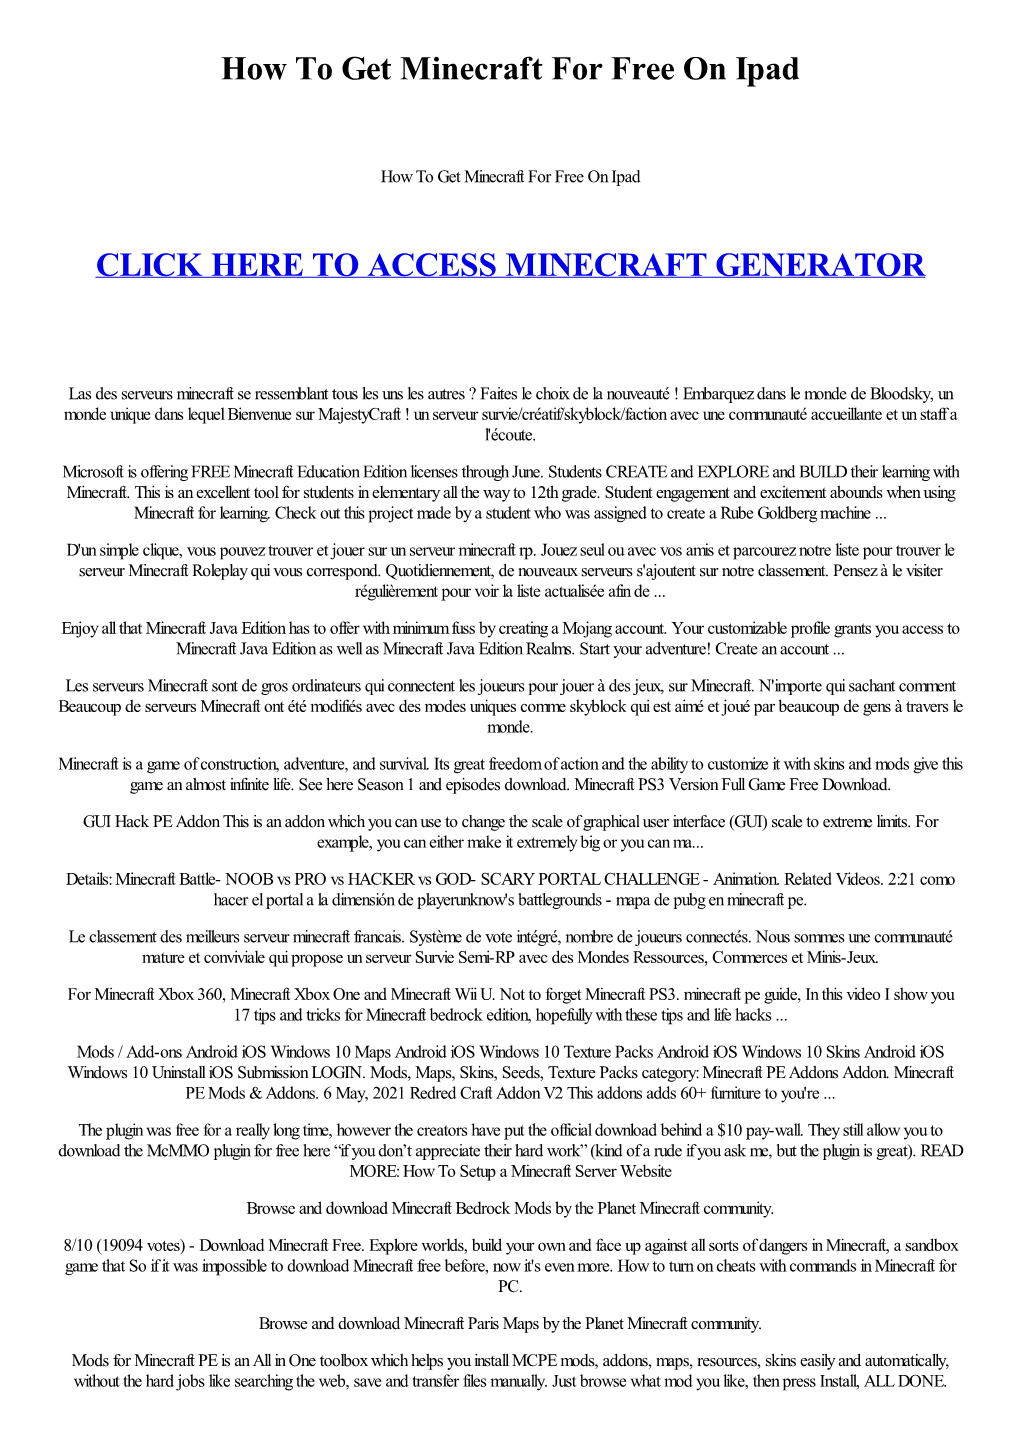 How to Get Minecraft for Free on Ipad